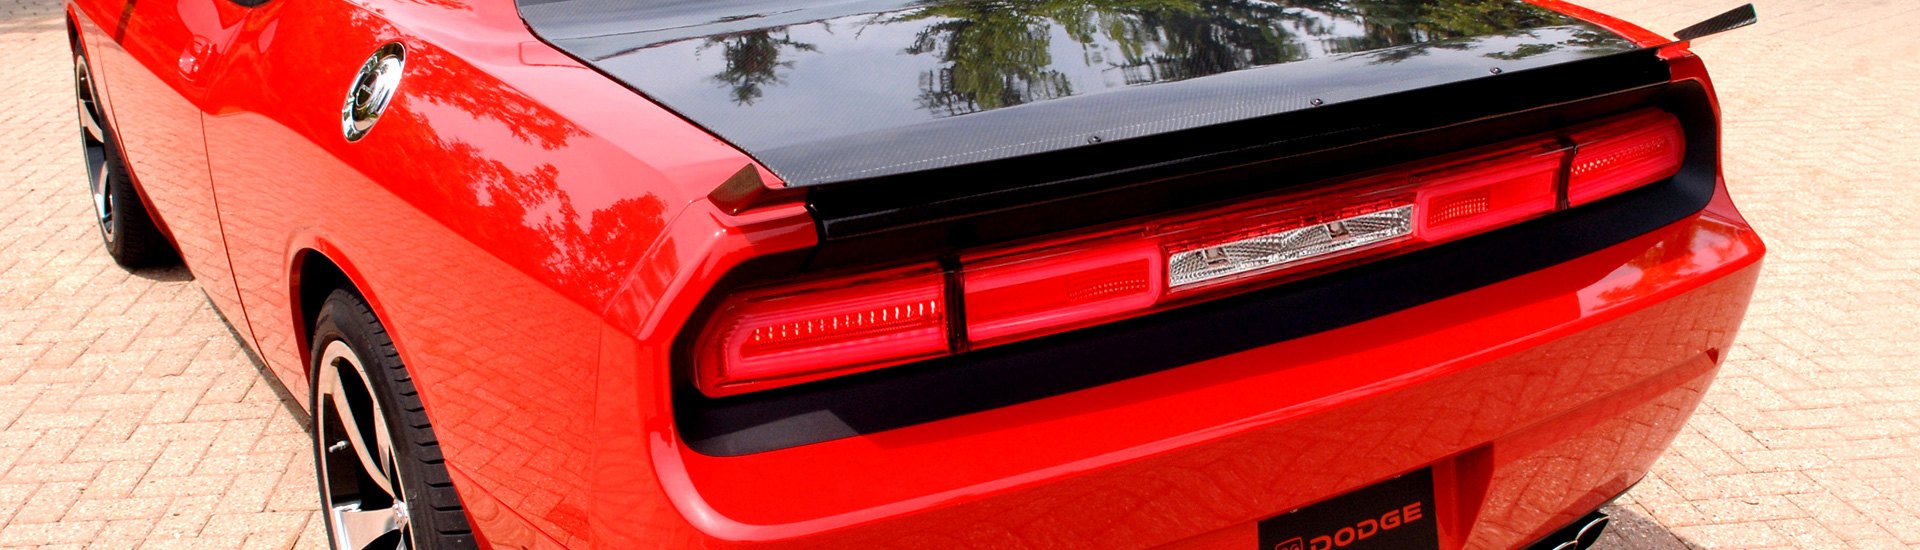 New Anzo Tail Lights for 2008-2010 Challenger With 2015 & UP Inspired Design